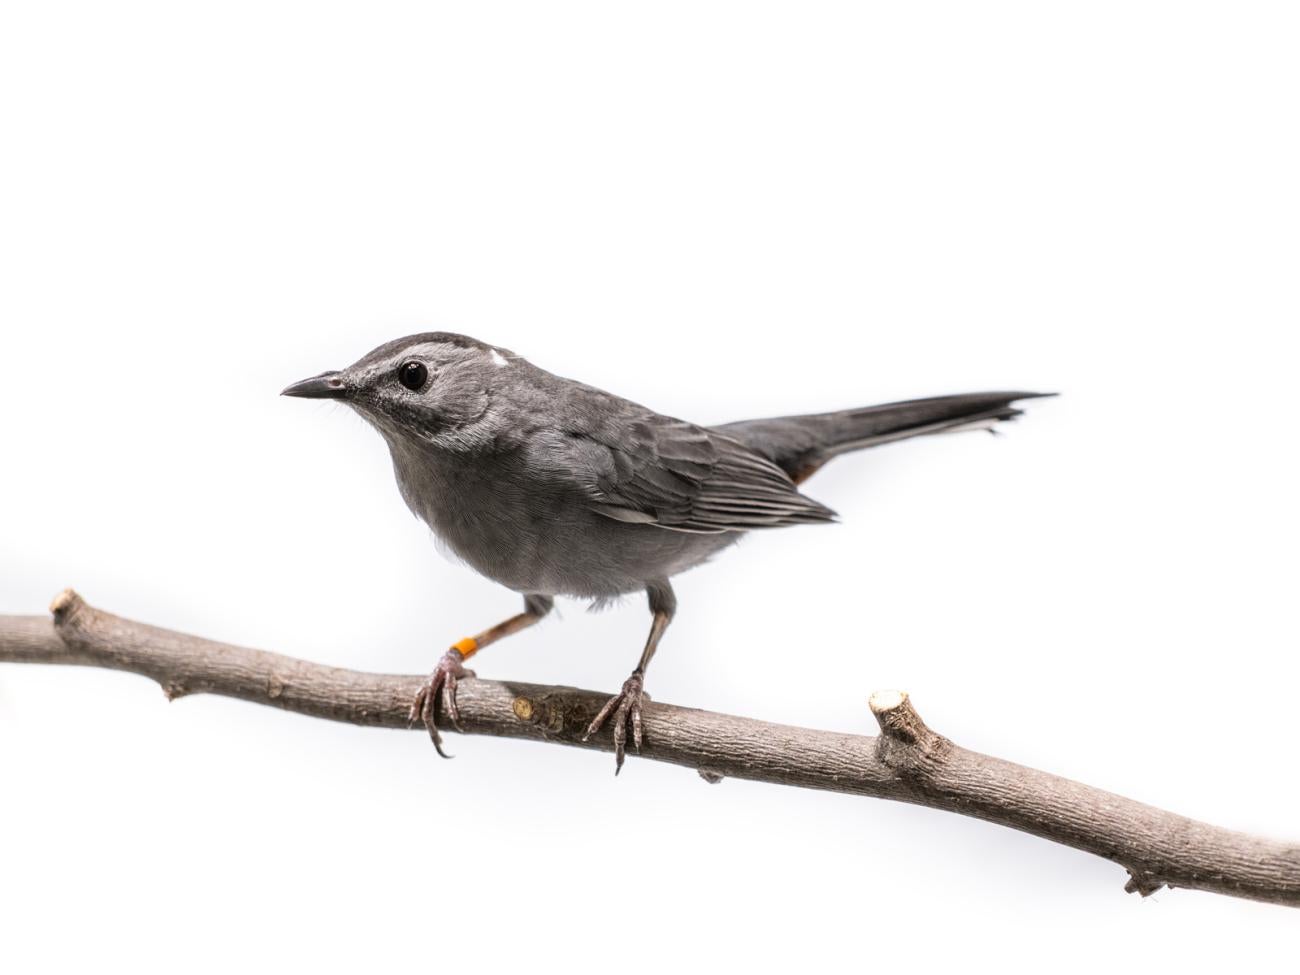 Gray catbird perched on a tree branch in front of a white background